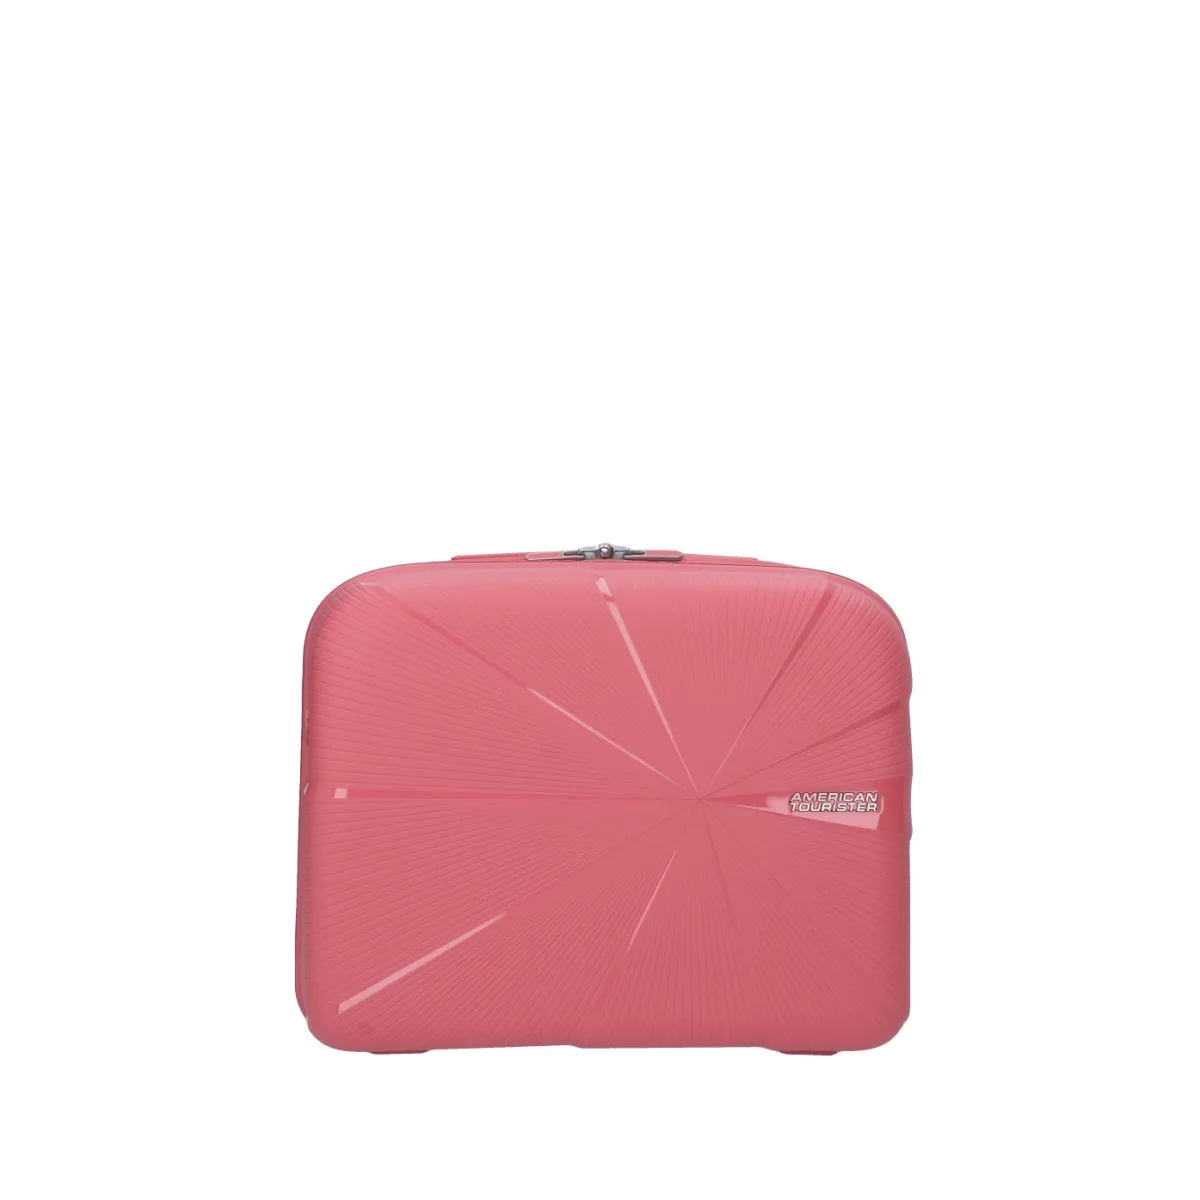 American tourister by samsonite Beauty case Sun kissed coral Starvibe MD5*00001